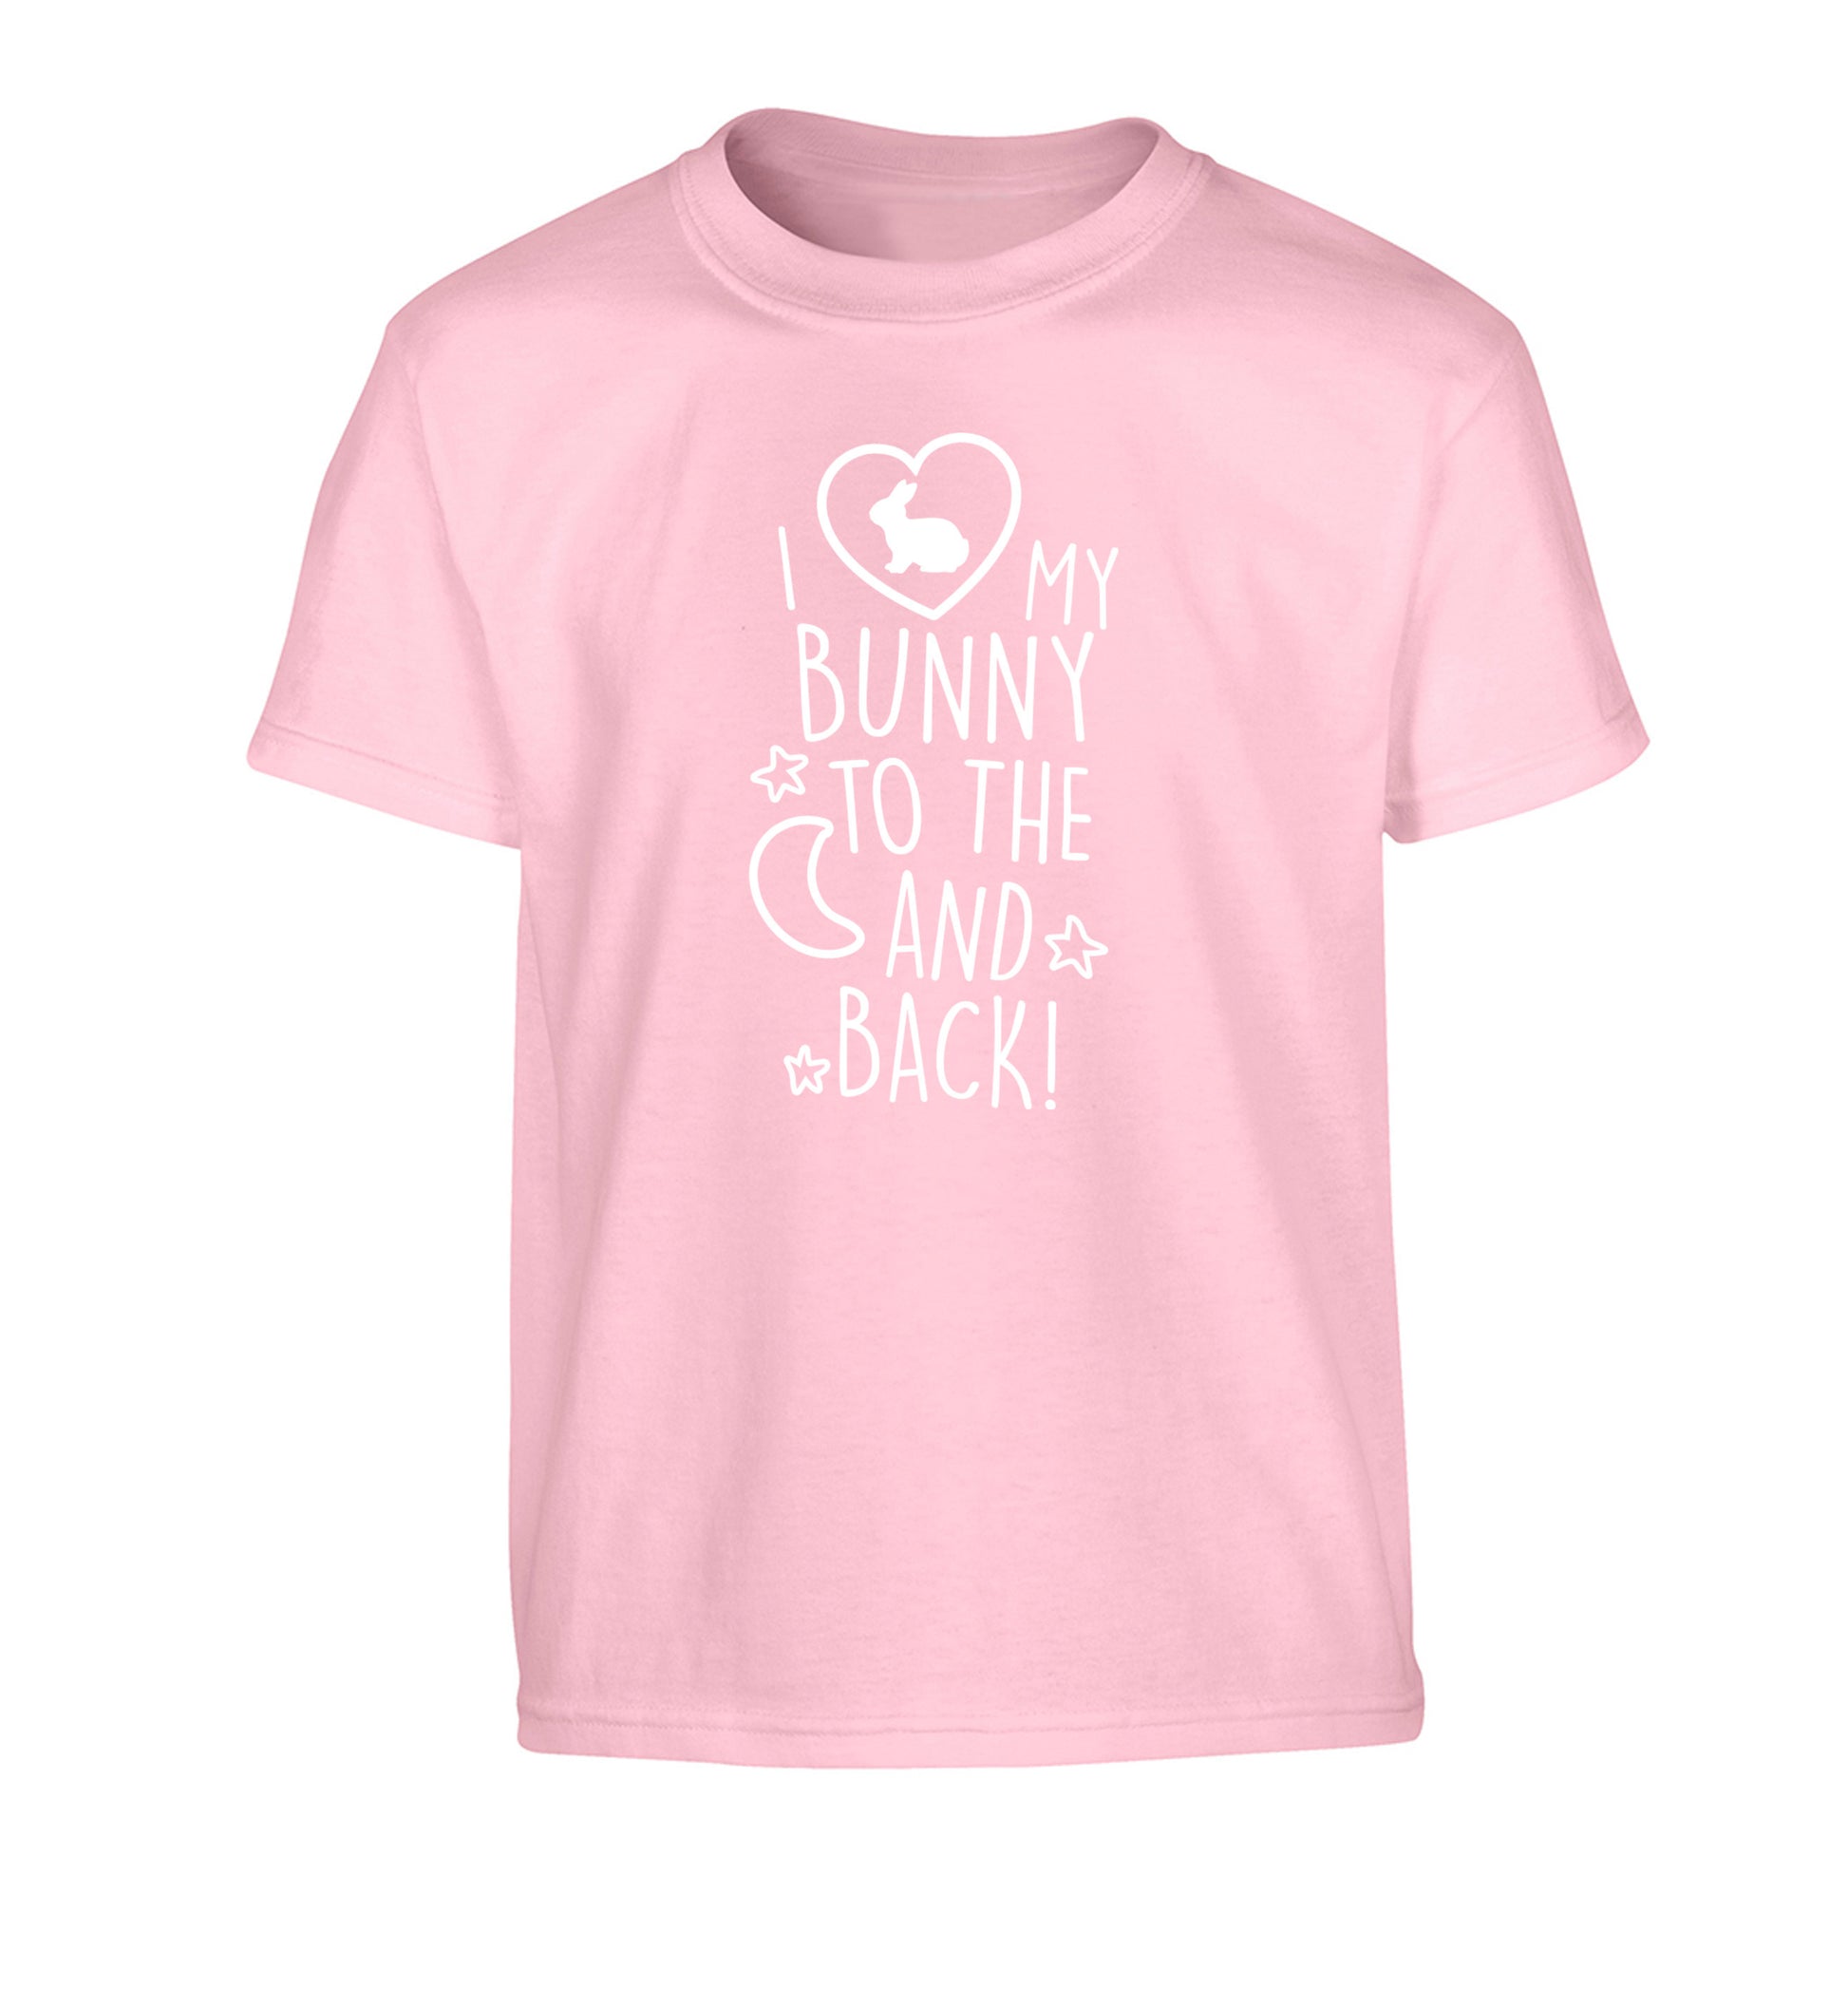 I love my bunny to the moon and back Children's light pink Tshirt 12-14 Years